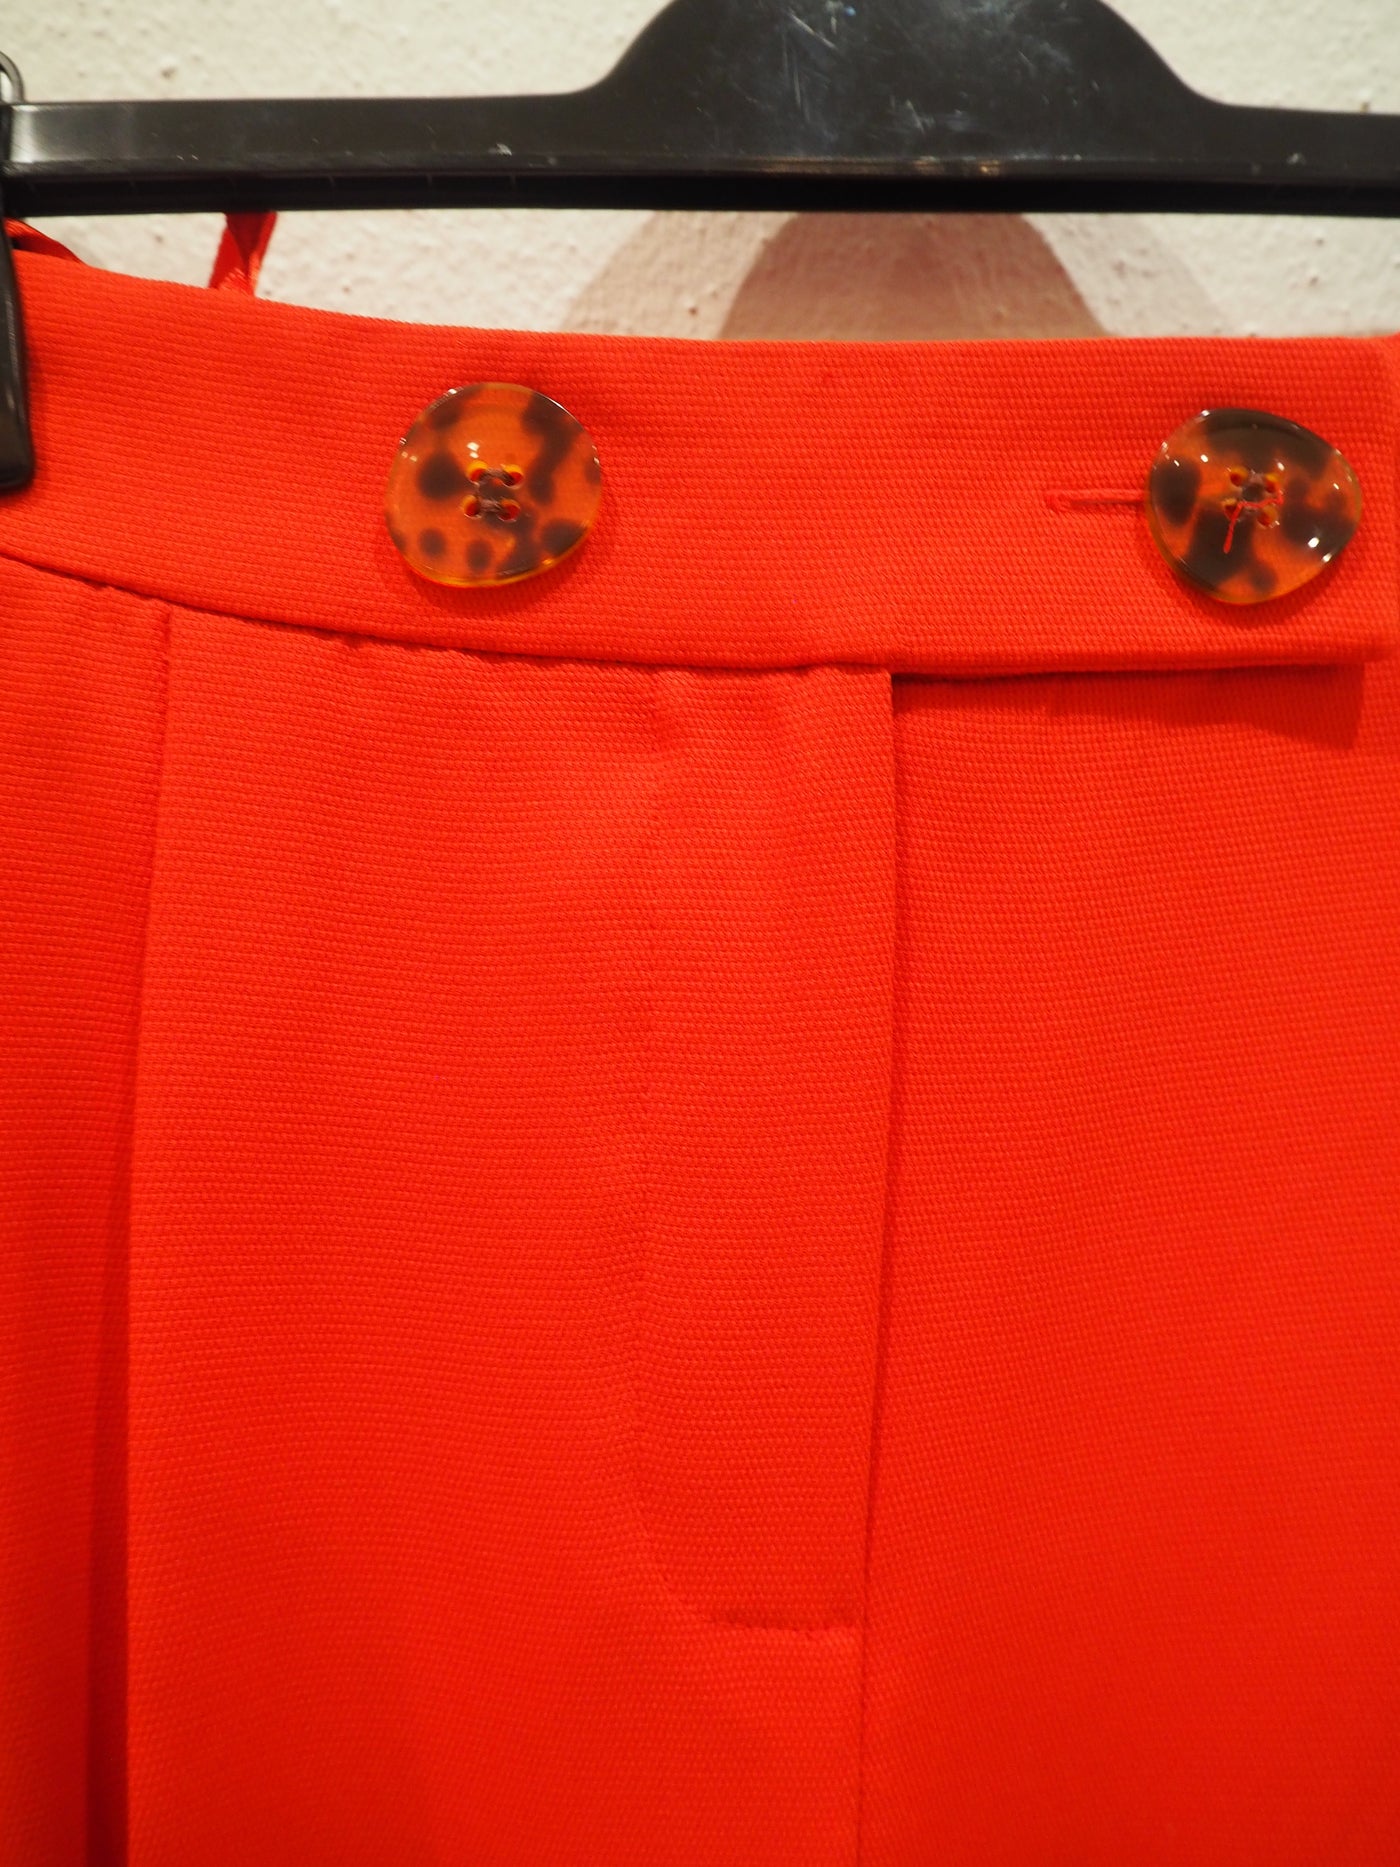 Topshop Red Culottes 8 New £29